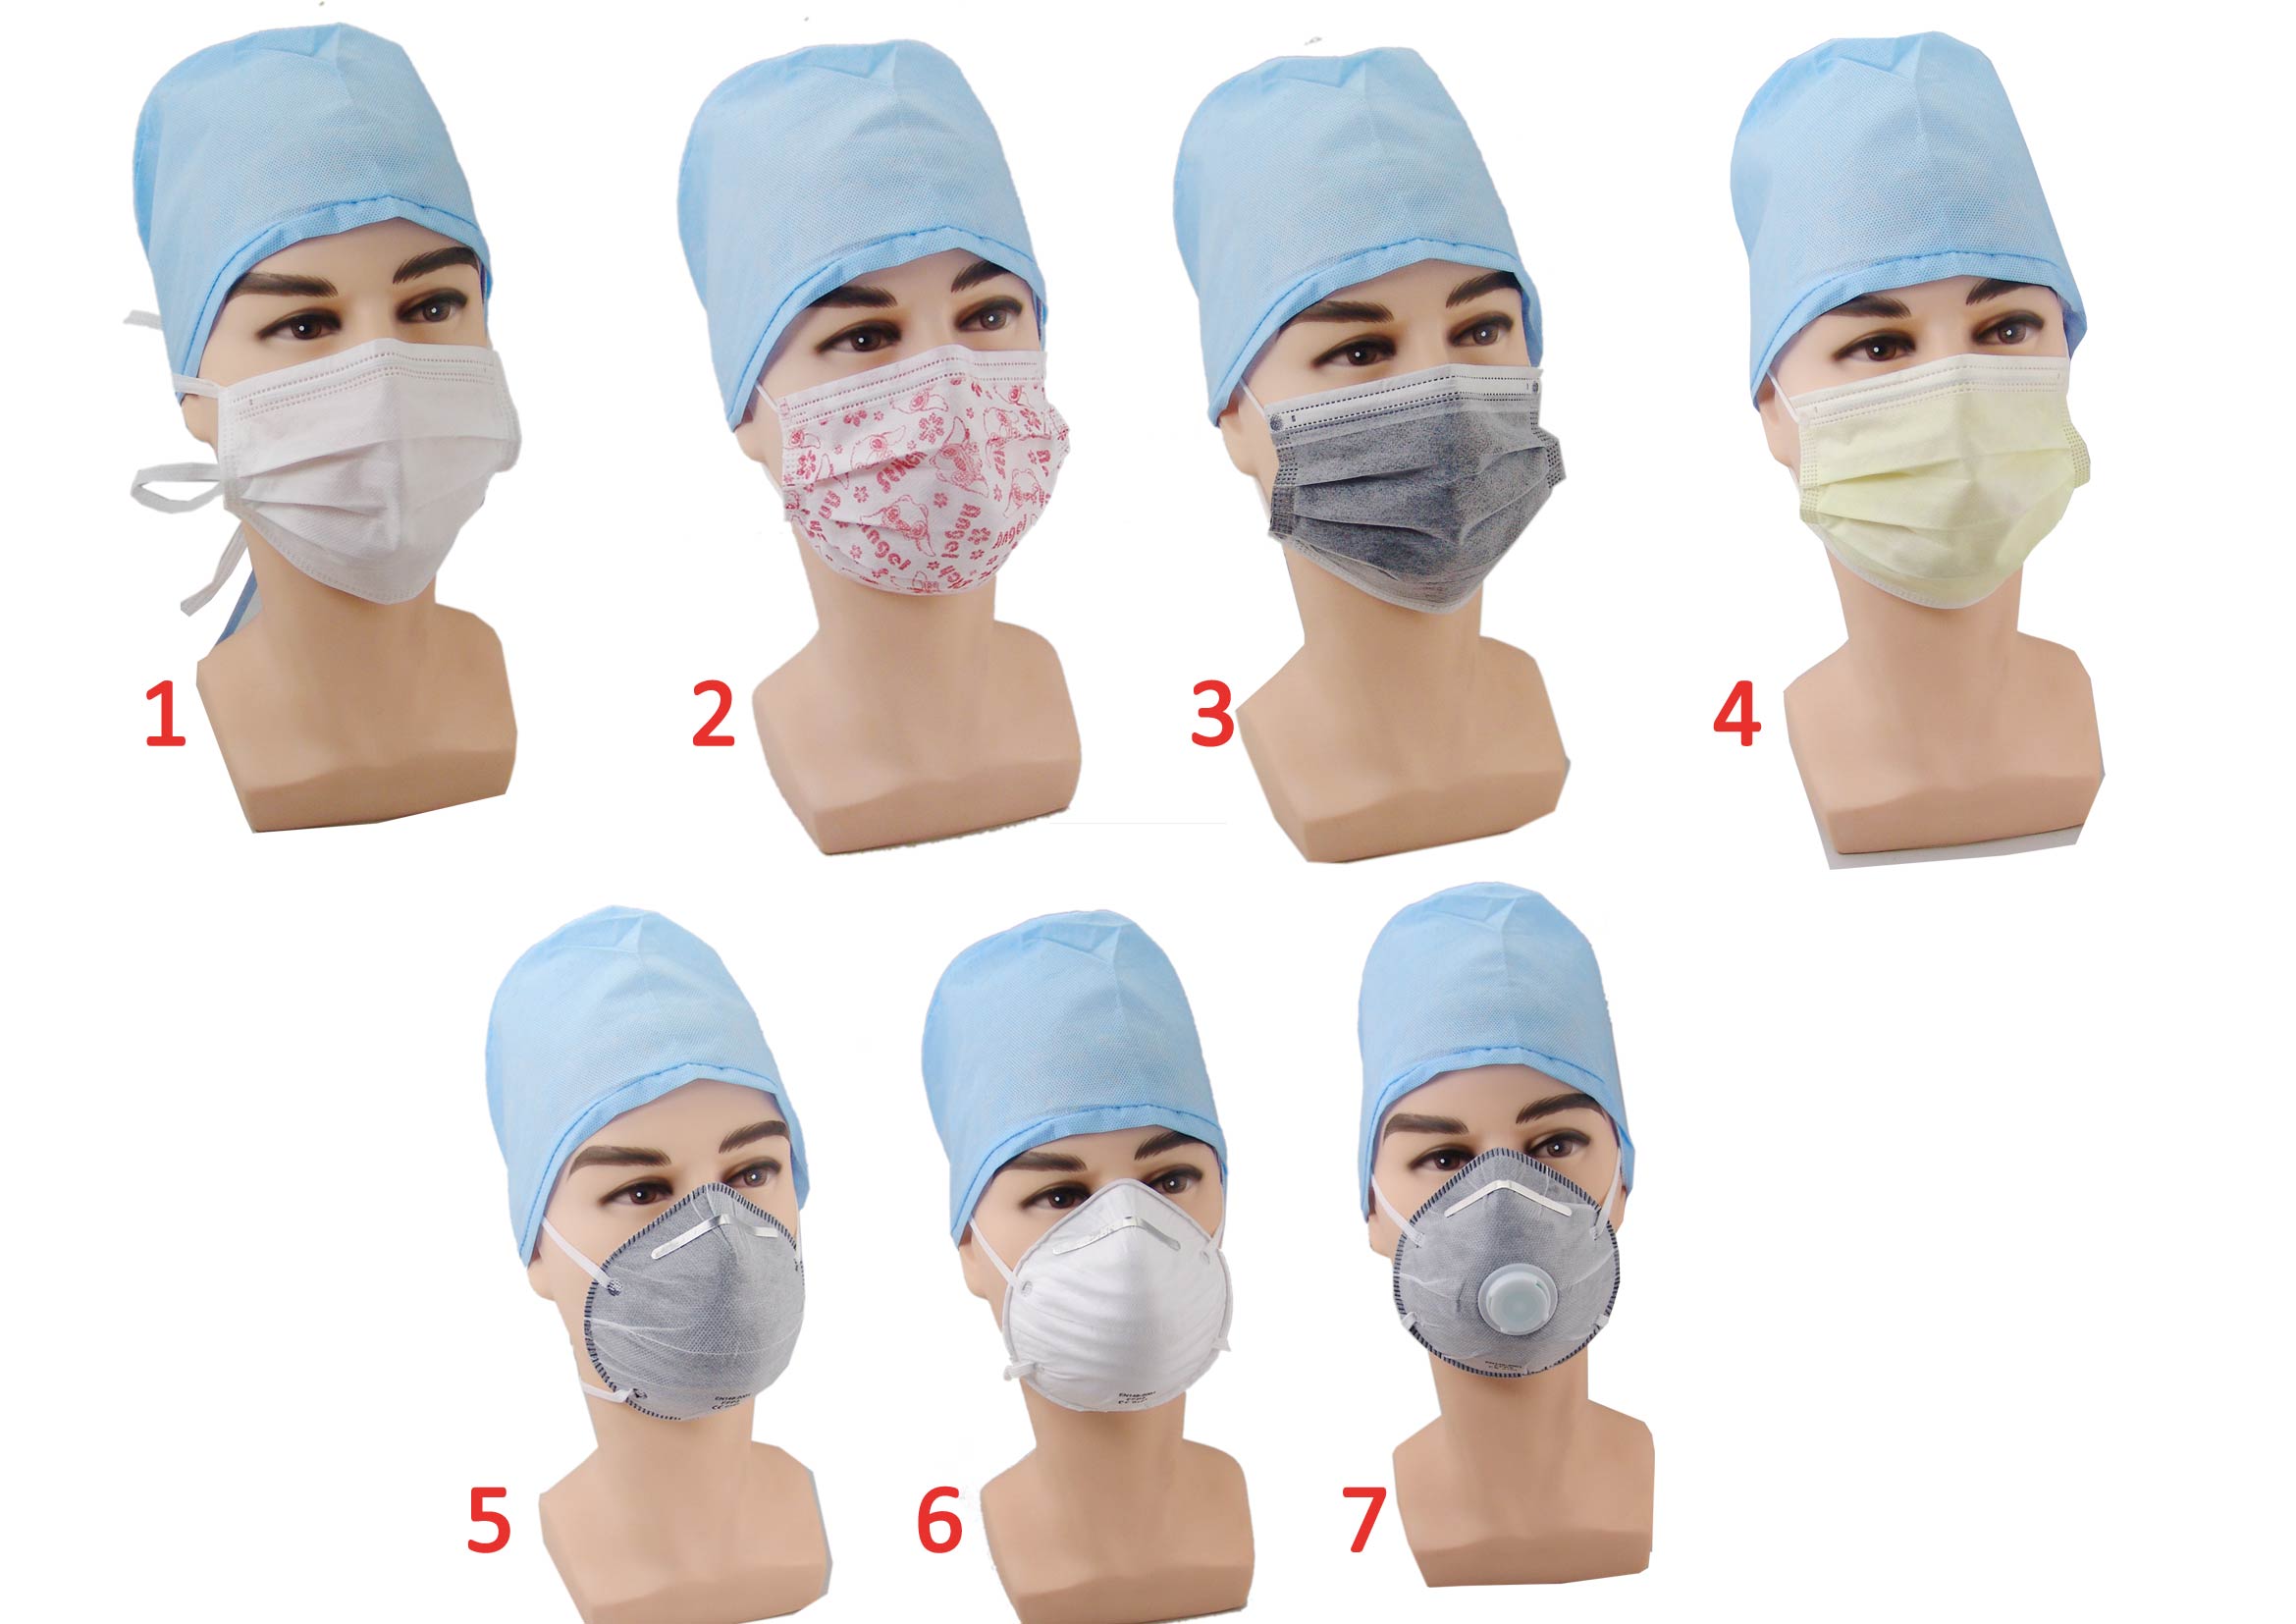 Why do masks prevent the spread of the virus?